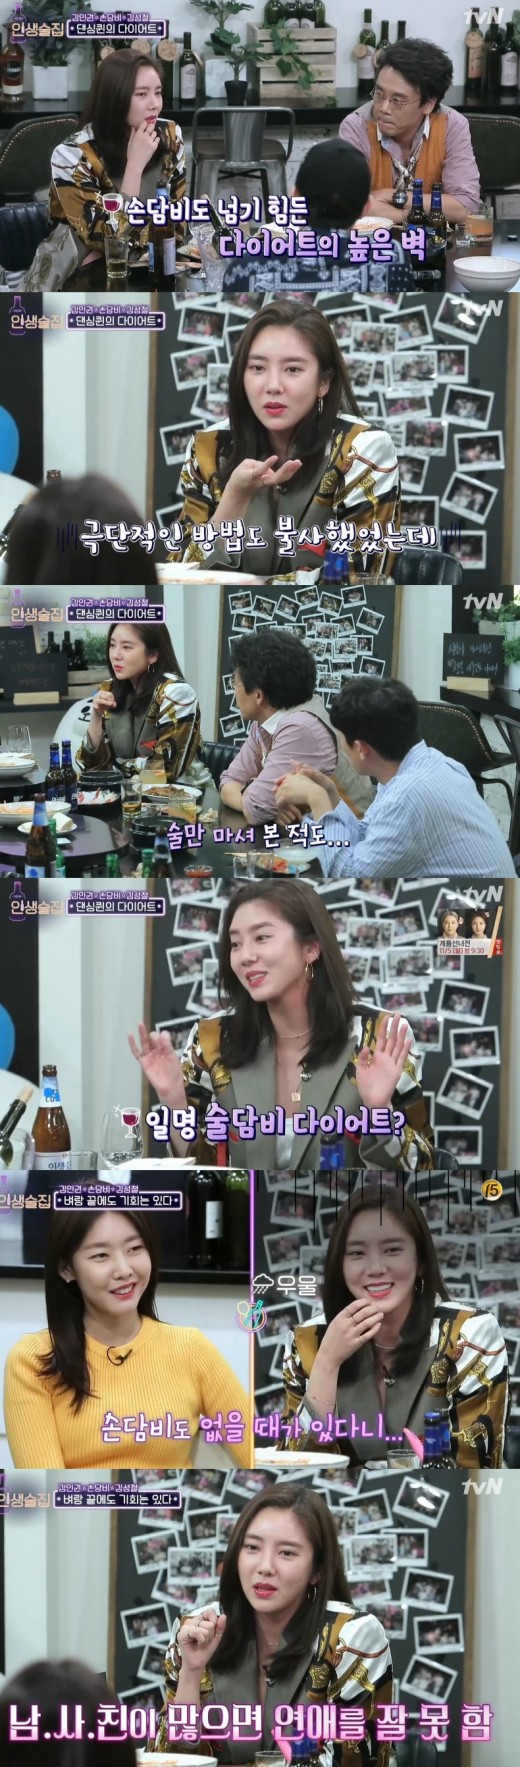 The story of the singer Son Dam-bi, not actress Son Dam-bi, was revealed through Life Bar.On TVN Life Bar, which aired on the 18th, Son Dam-bi appeared and showed off his genuine gesture.Diet was getting a little bit more comfortable by the late twenties, but I dont get drunk, Son Dam-bi said.Diet was harder when I drank, and I was slowing down because I didnt have a snack, Son Dam-bi said.I didnt have a fat constitution, Son Dam-bi said. Ive failed a lot of things, Ive done emperor Diet, Ive done one food Diet, Ive only tried drinking.In the end, the answer to Diet found by Son Dam-bi was exercise.Son Dam-bi said, Basically, we do tennis and health Pilates. We are aerobic with tennis and making muscles with health and Pilates.But even if it is the same as before, it is different from before, so it is annoying in my position. Son Dam-bi dismissed the question, What do you think youre going to have a constant relationship with me? and said, No, there is no time when there is no time.MC Han Hye-jin was surprised that Son Dam-bi sometimes does not have a boyfriend.Son Dam-bi said, I have a lot of Nam Sachin. He said, I hate my boyfriend.According to his best friend Kim Hee-chul, Son Dam-bi is a style that gives a great affection to his boyfriend. However, Son Dam-bi confessed that he missed a lot of men because he said he was working more than love.